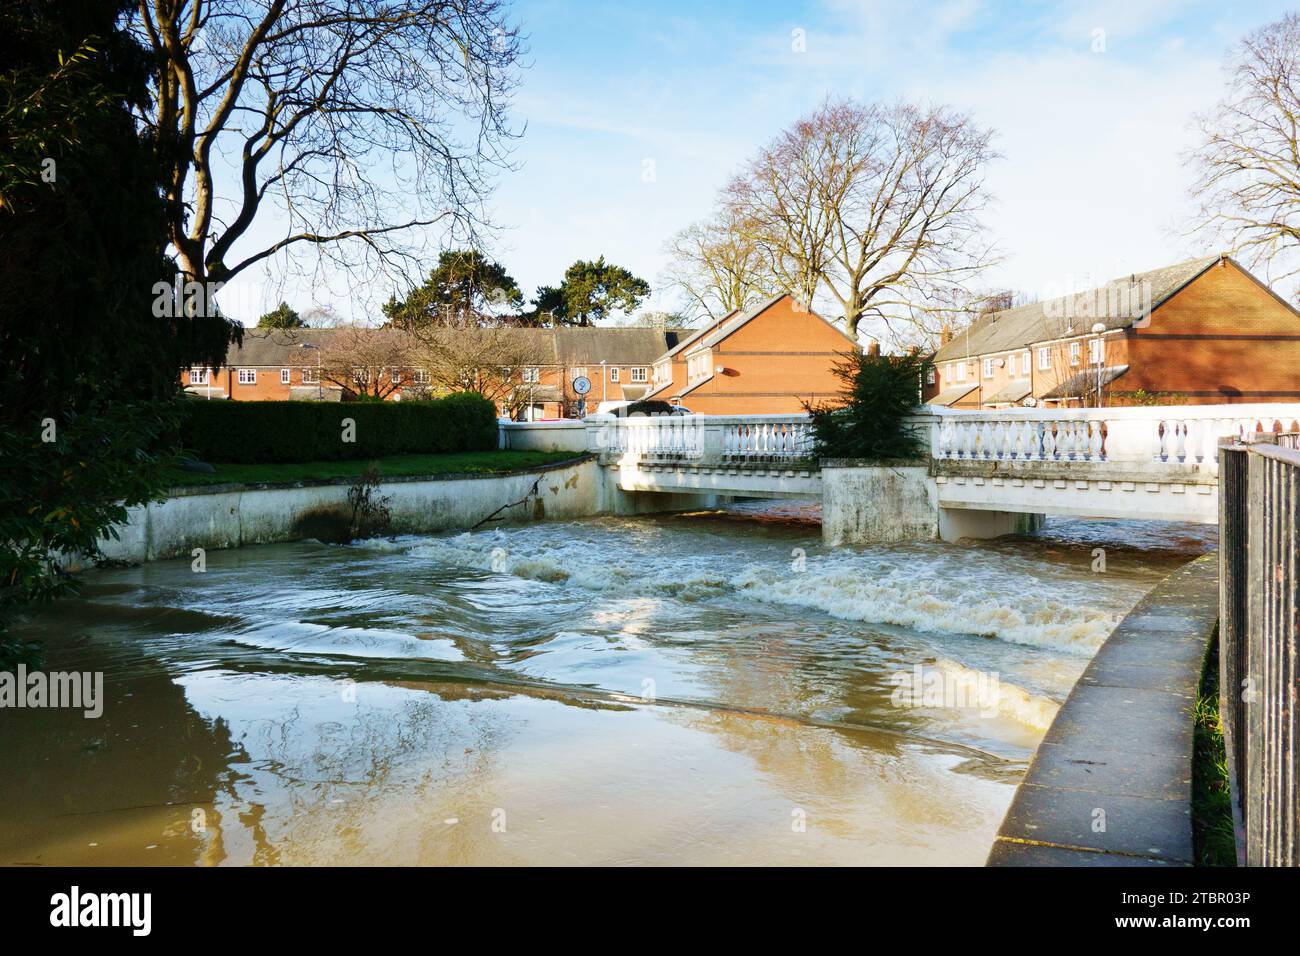 River Witham in flood high water flows under the White Bridge at Wyndham Park, Grantham, Lincolnshire, England Stock Photo